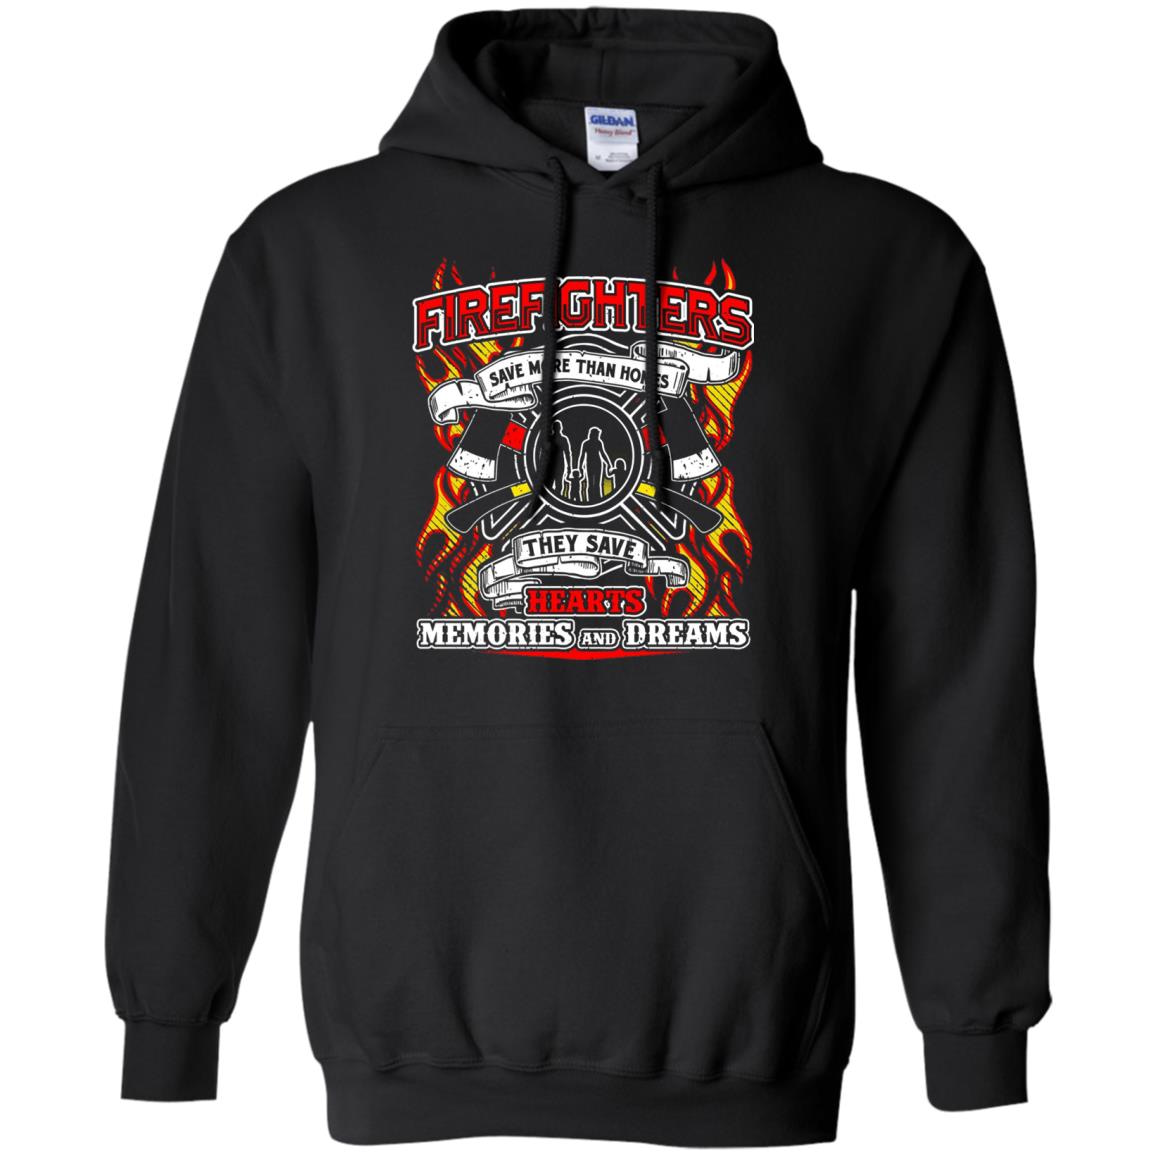 Inktee Store - Firefighters Save More Than Homes They Save Dreams Hoodies Image